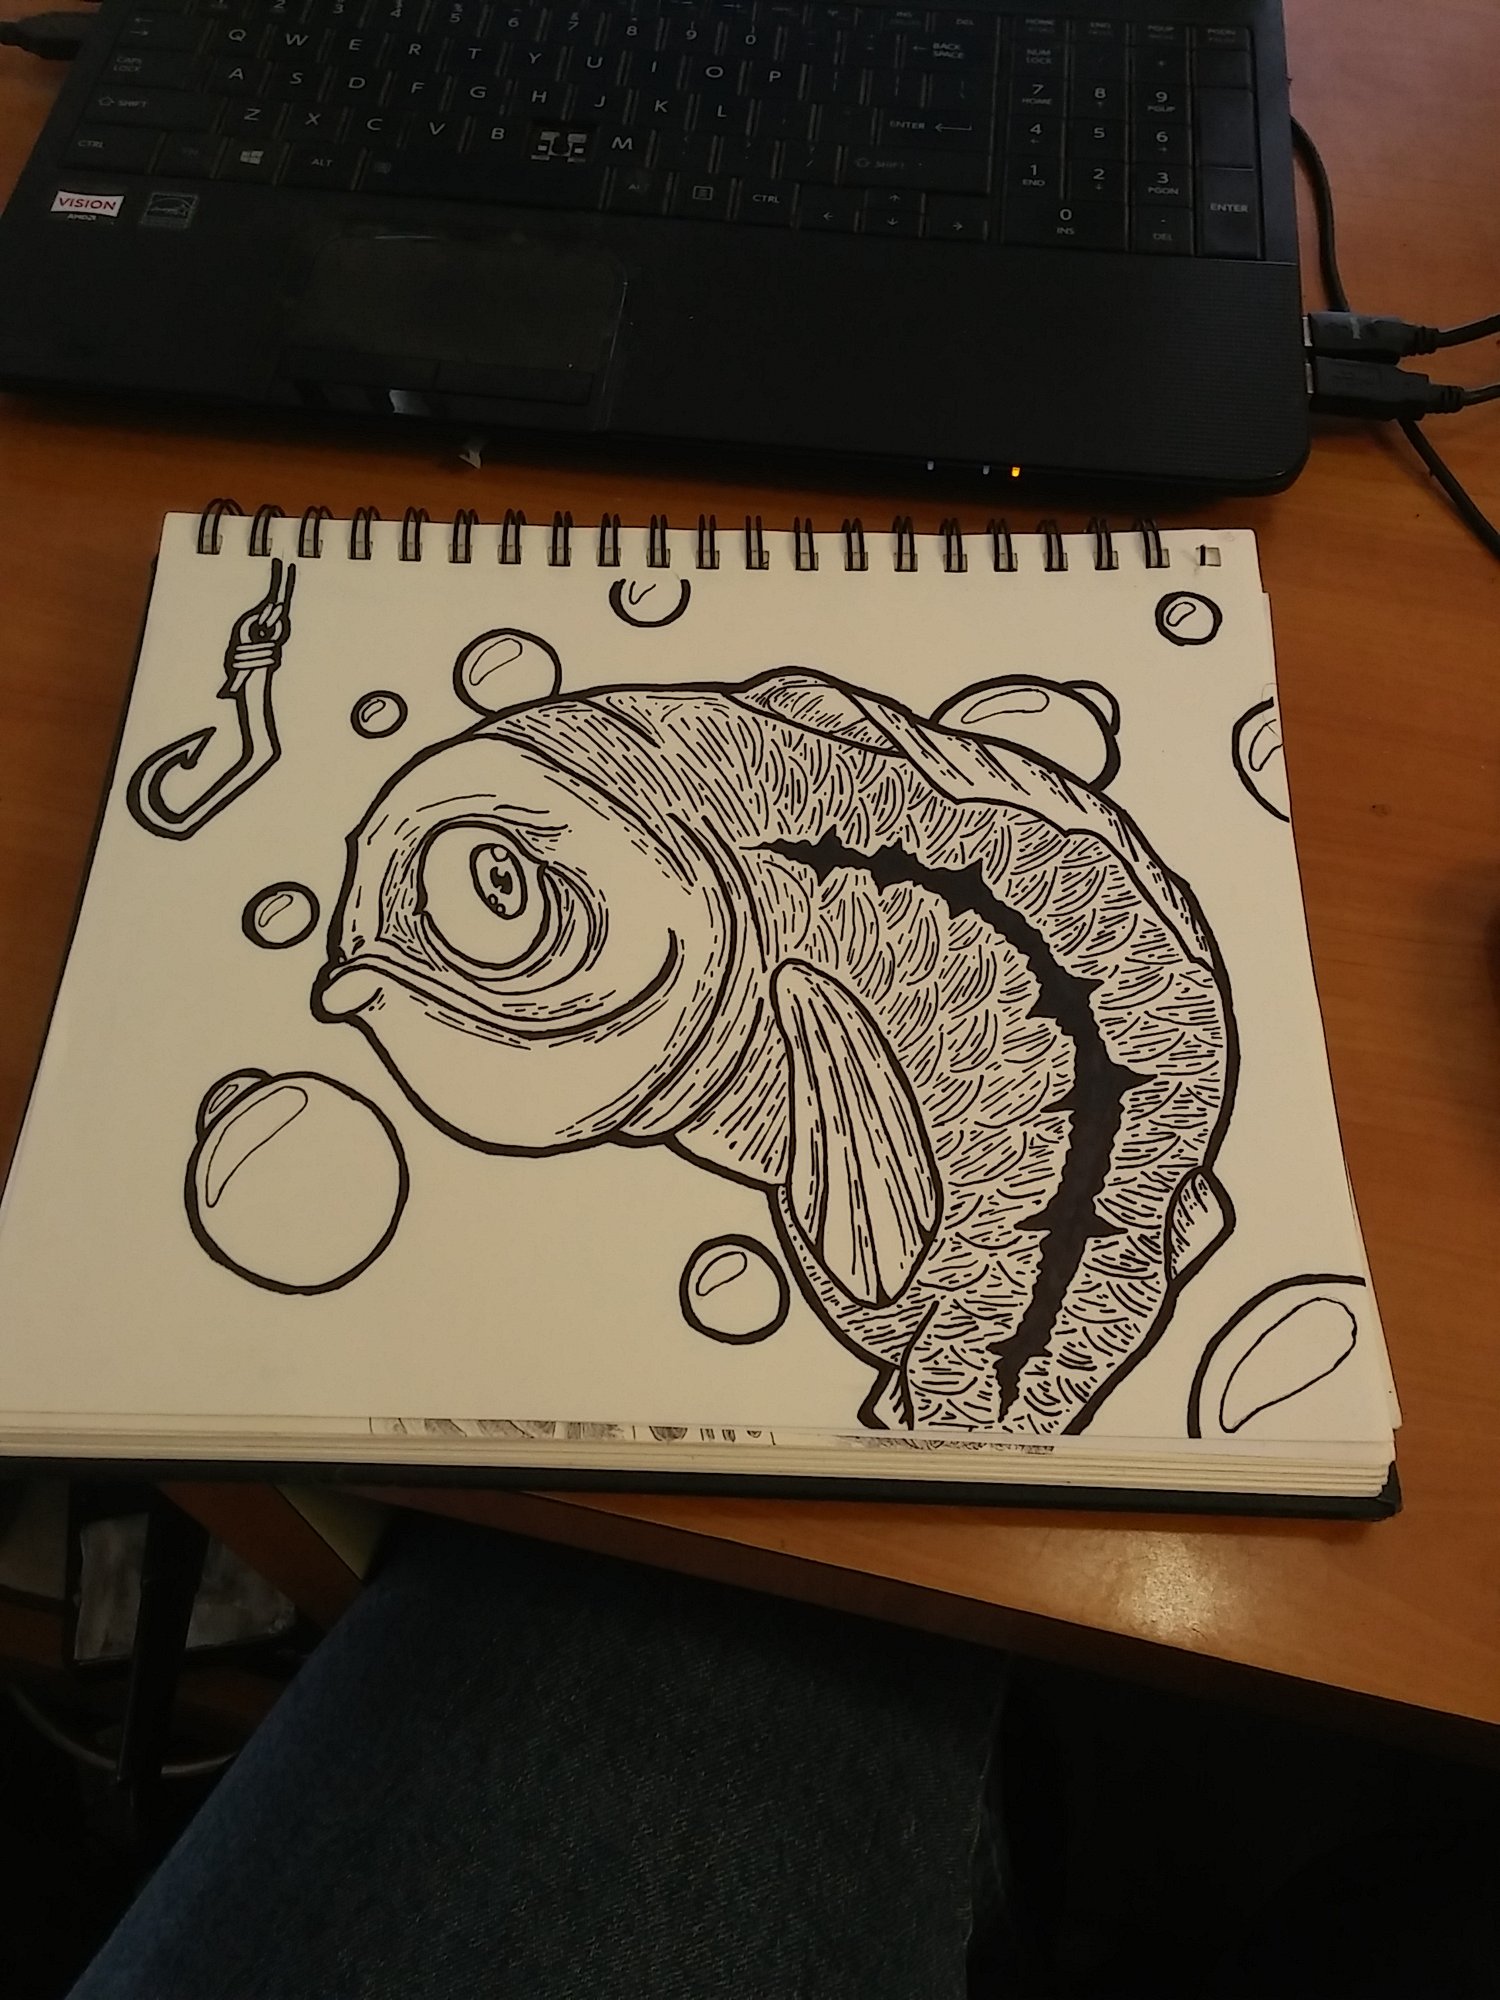 Chubby fish 8.5x11" doodle